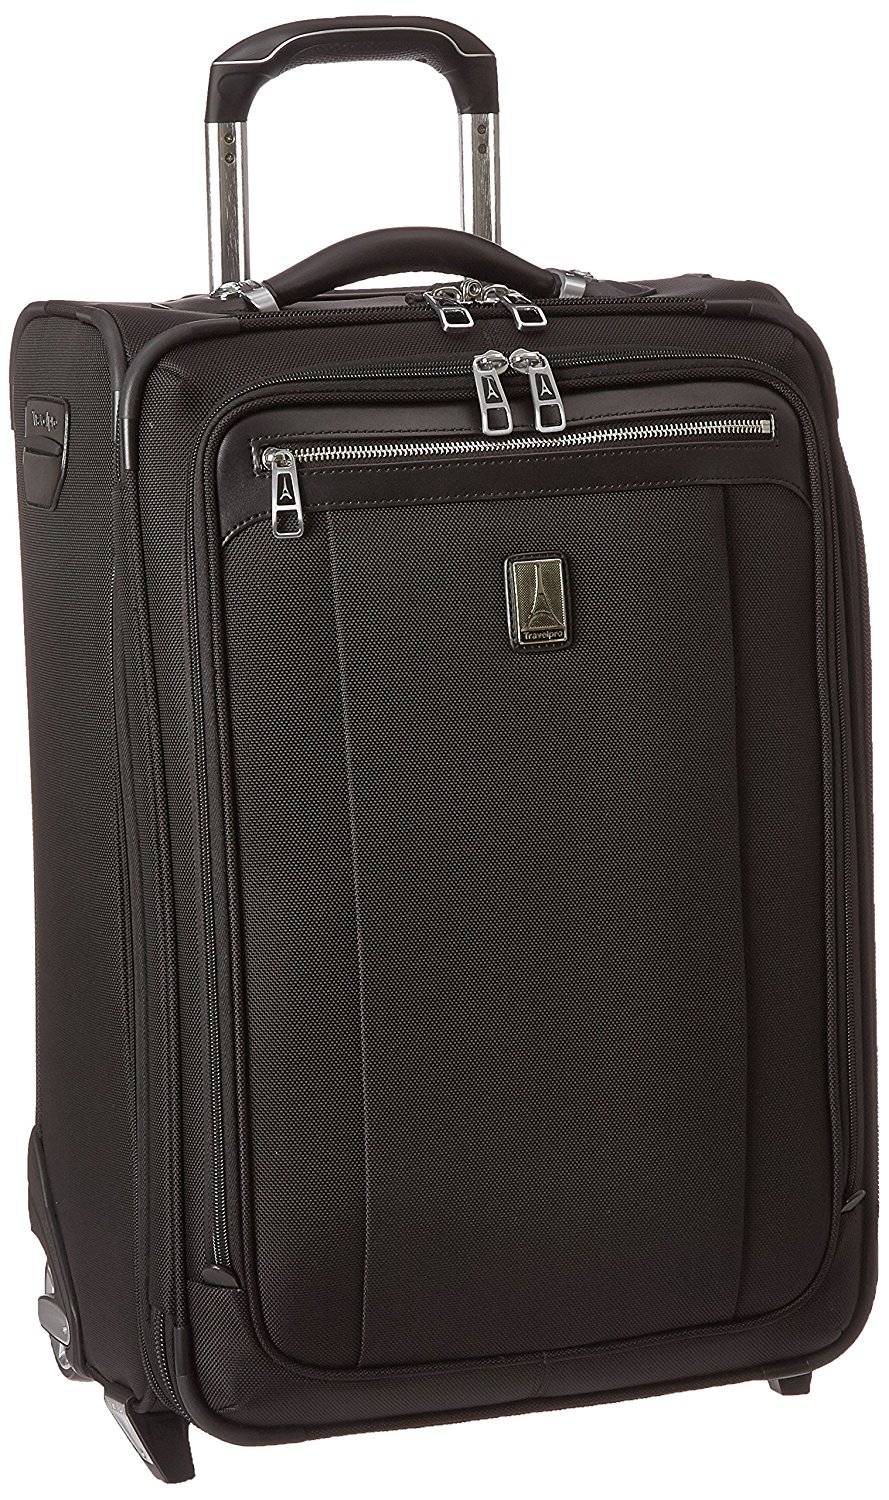 Travelpro Platinum Magna 2 Carry-On Expandable Rollaboard Suiter Suitcase, 22-in., Black